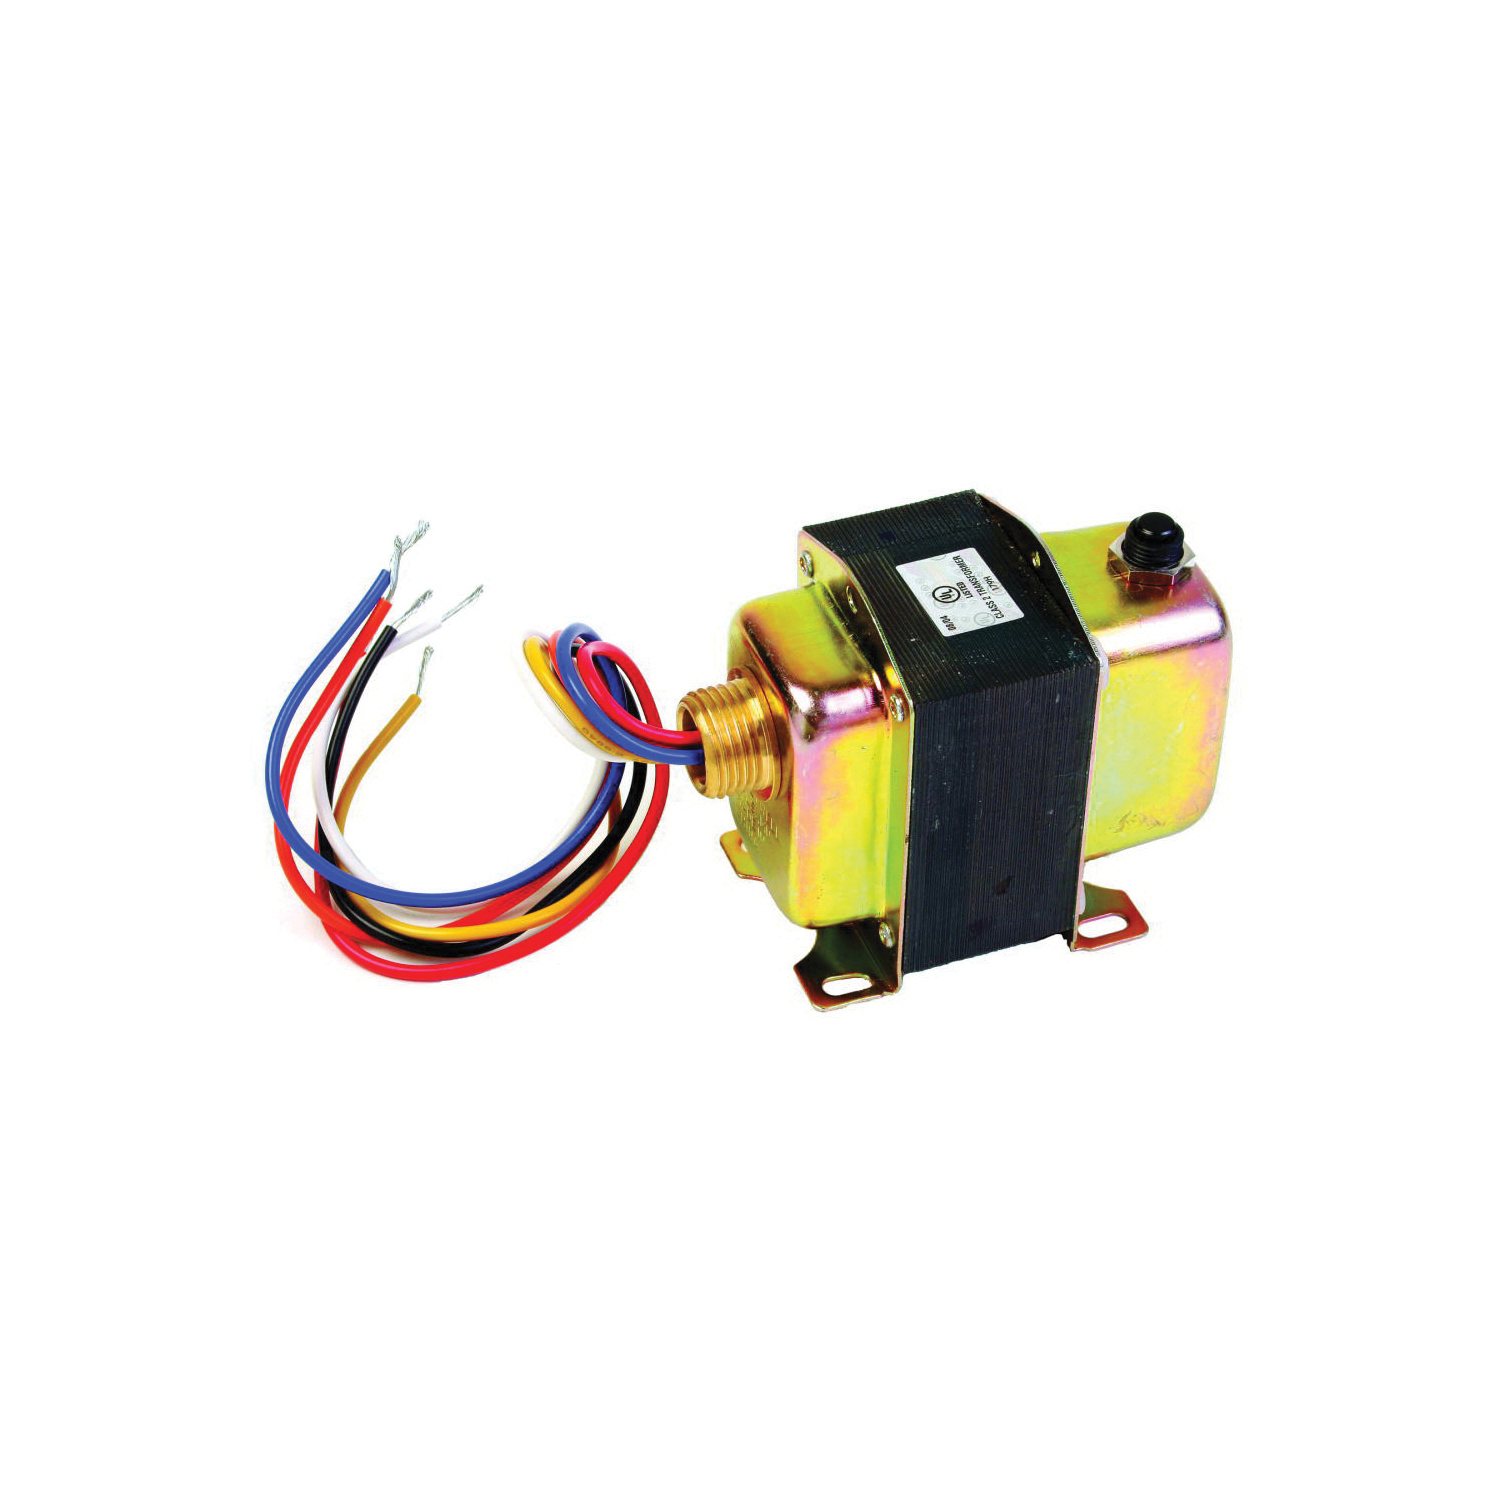 Resideo AT175F1023/U Transformer With 9 in Lead Wires, 120/208/240 VAC Primary, 27.5 VAC Secondary, 75 VA Power Rating